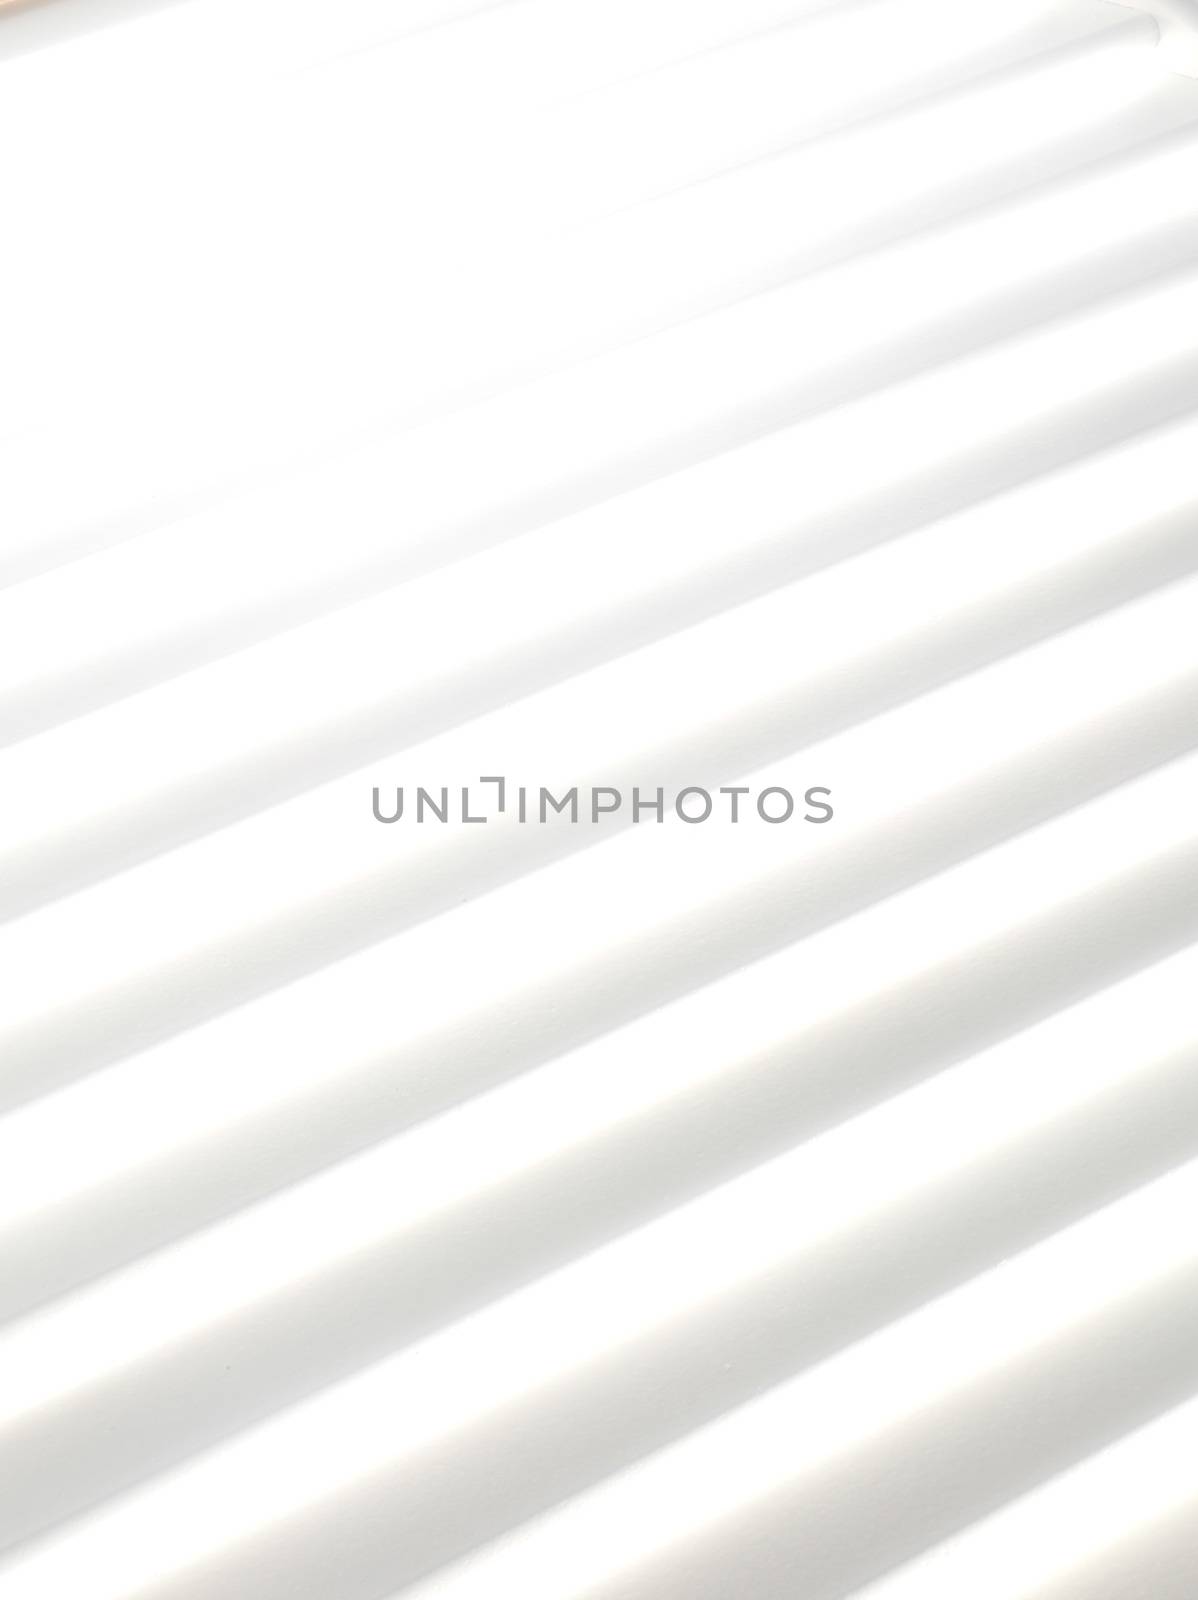 An abstract detail of a withe shutter, useful for background